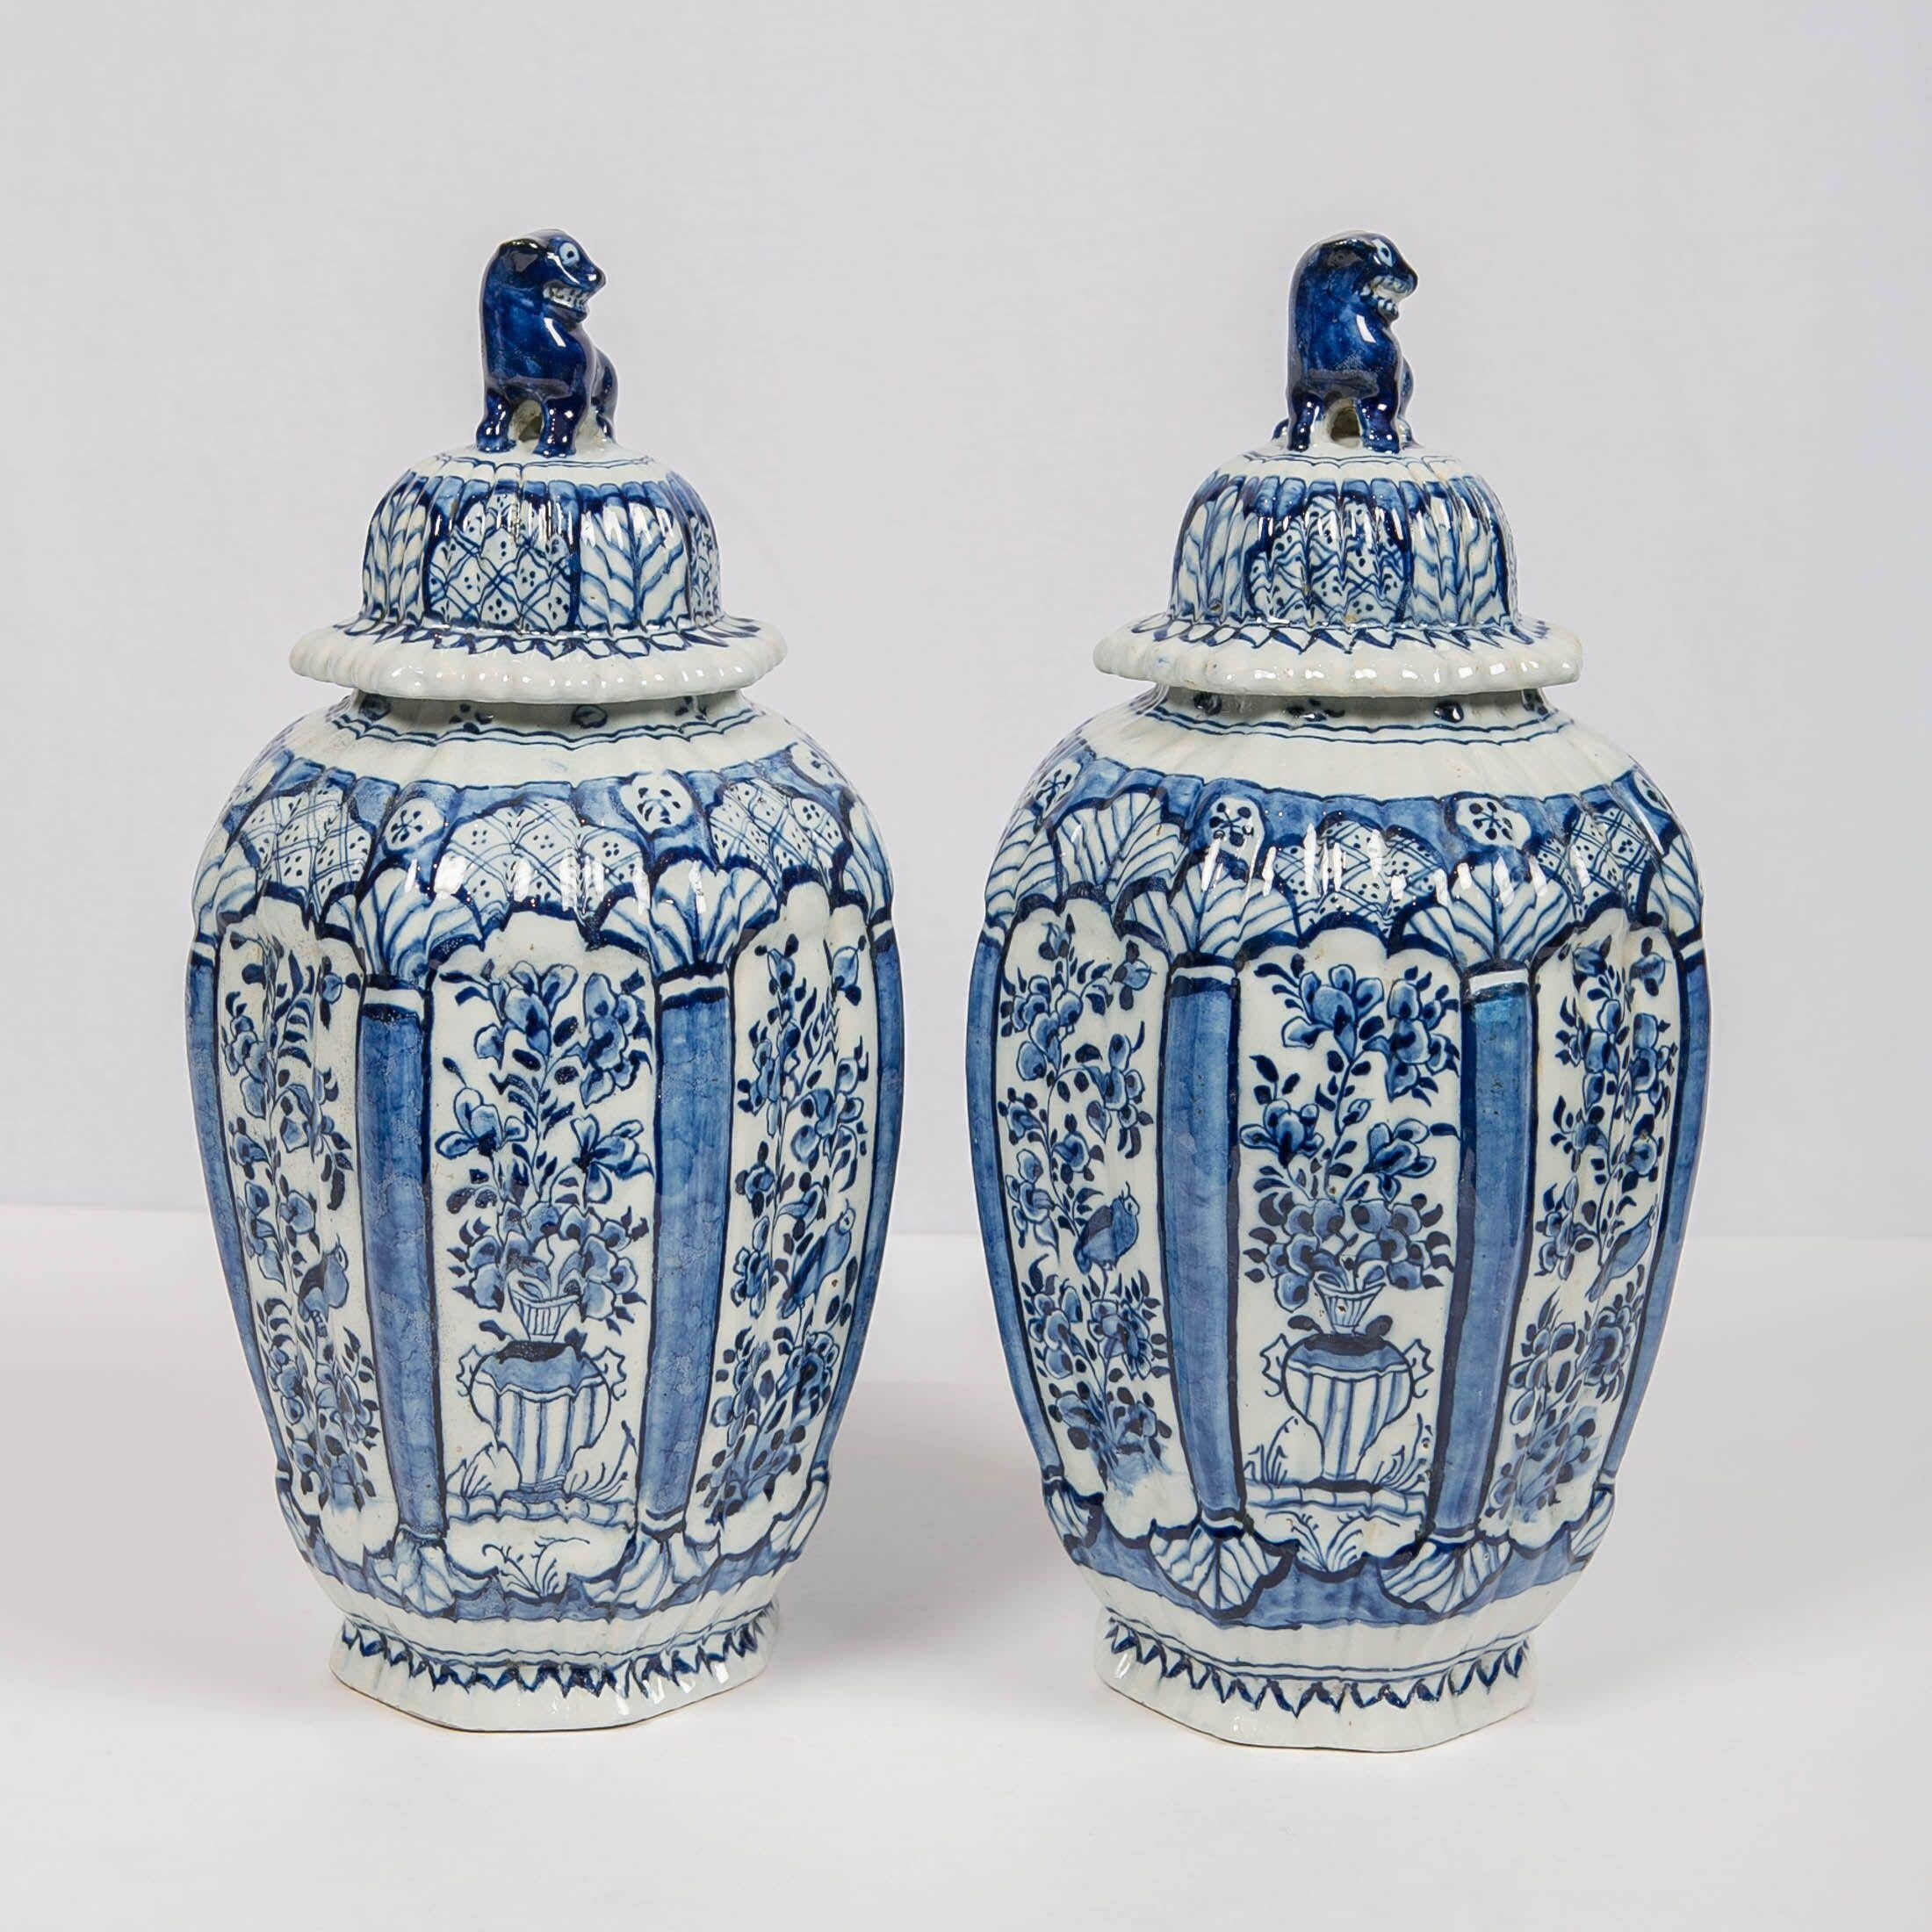 We are pleased to offer this beautiful pair of Dutch delft blue and white ginger jars with lion finials. They are molded in the traditional delft octagonal shape with a fluted surface. The jars are decorated with panels showing a songbird in a